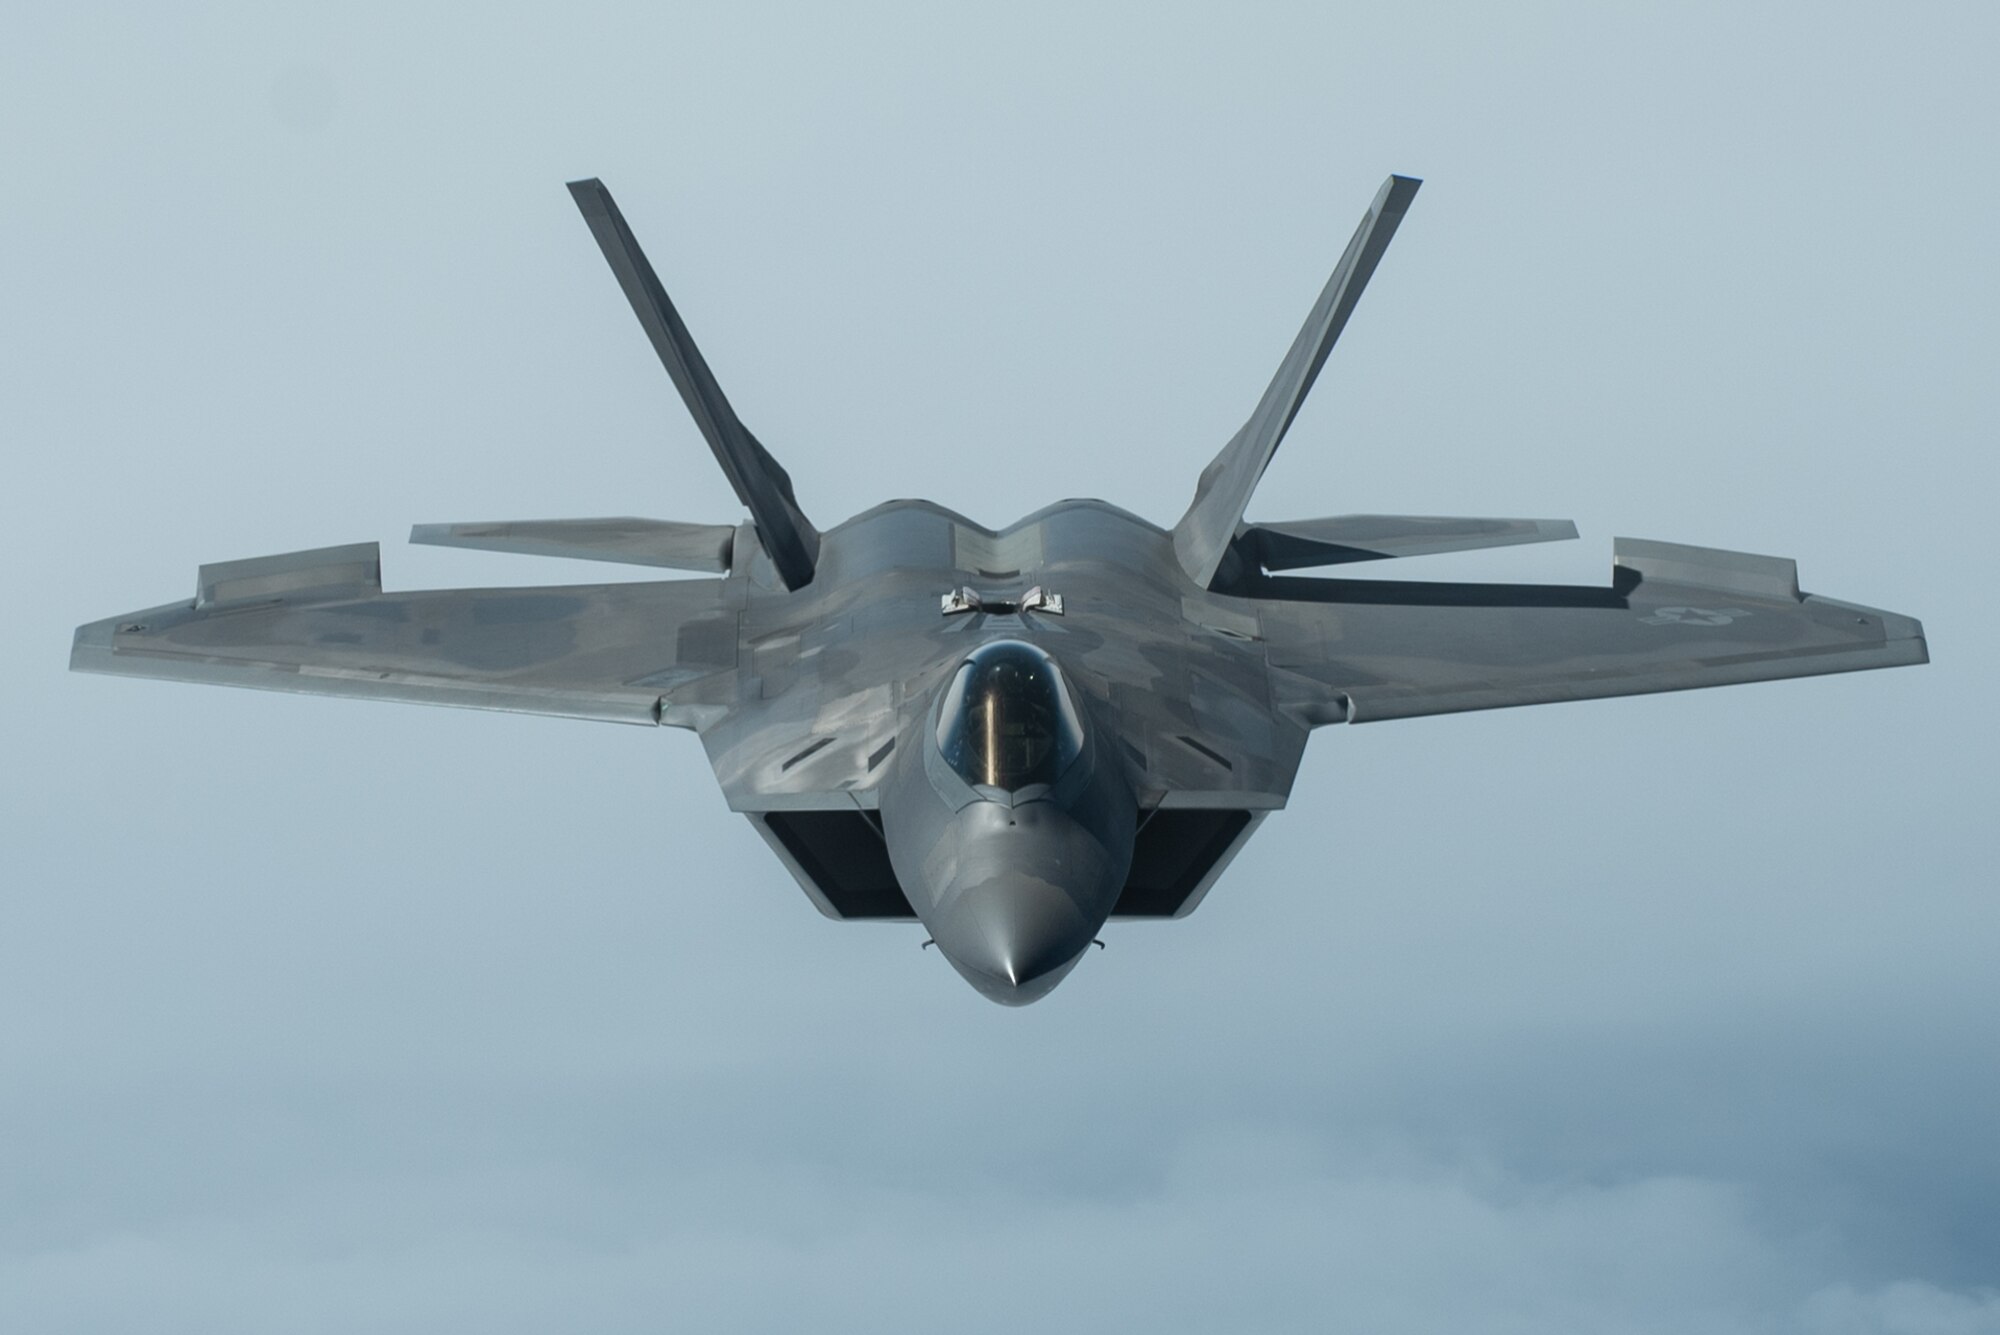 F-22 during an aerial refueling mission